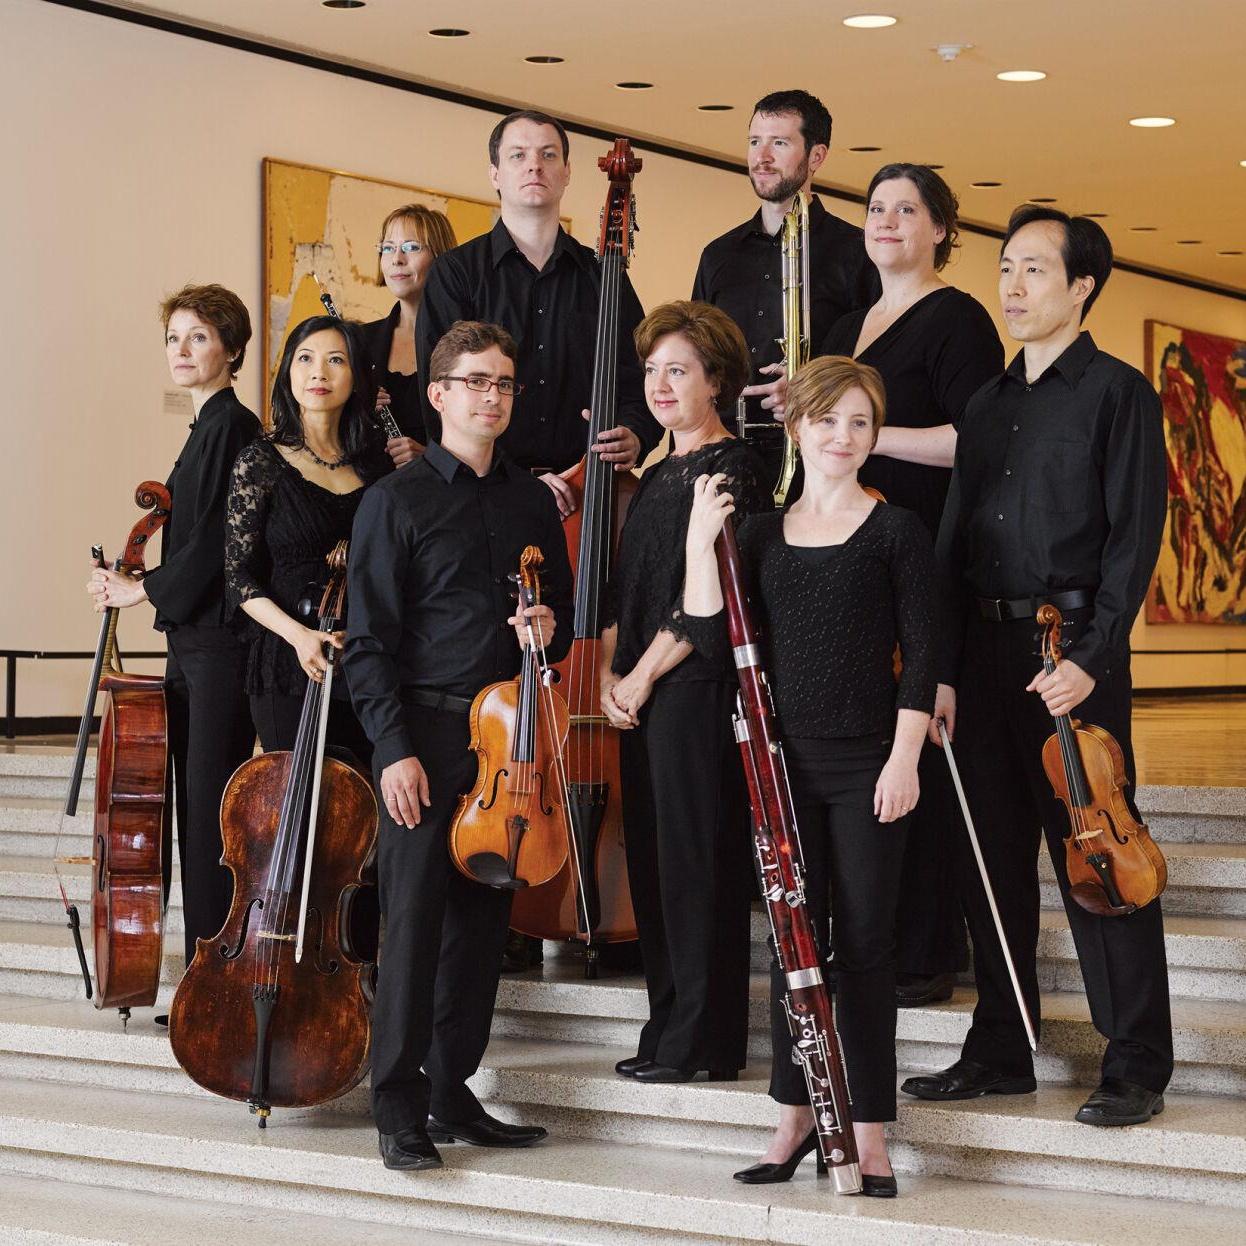 Photo of Buffalo Chamber Players with their instruments, dressed in all black